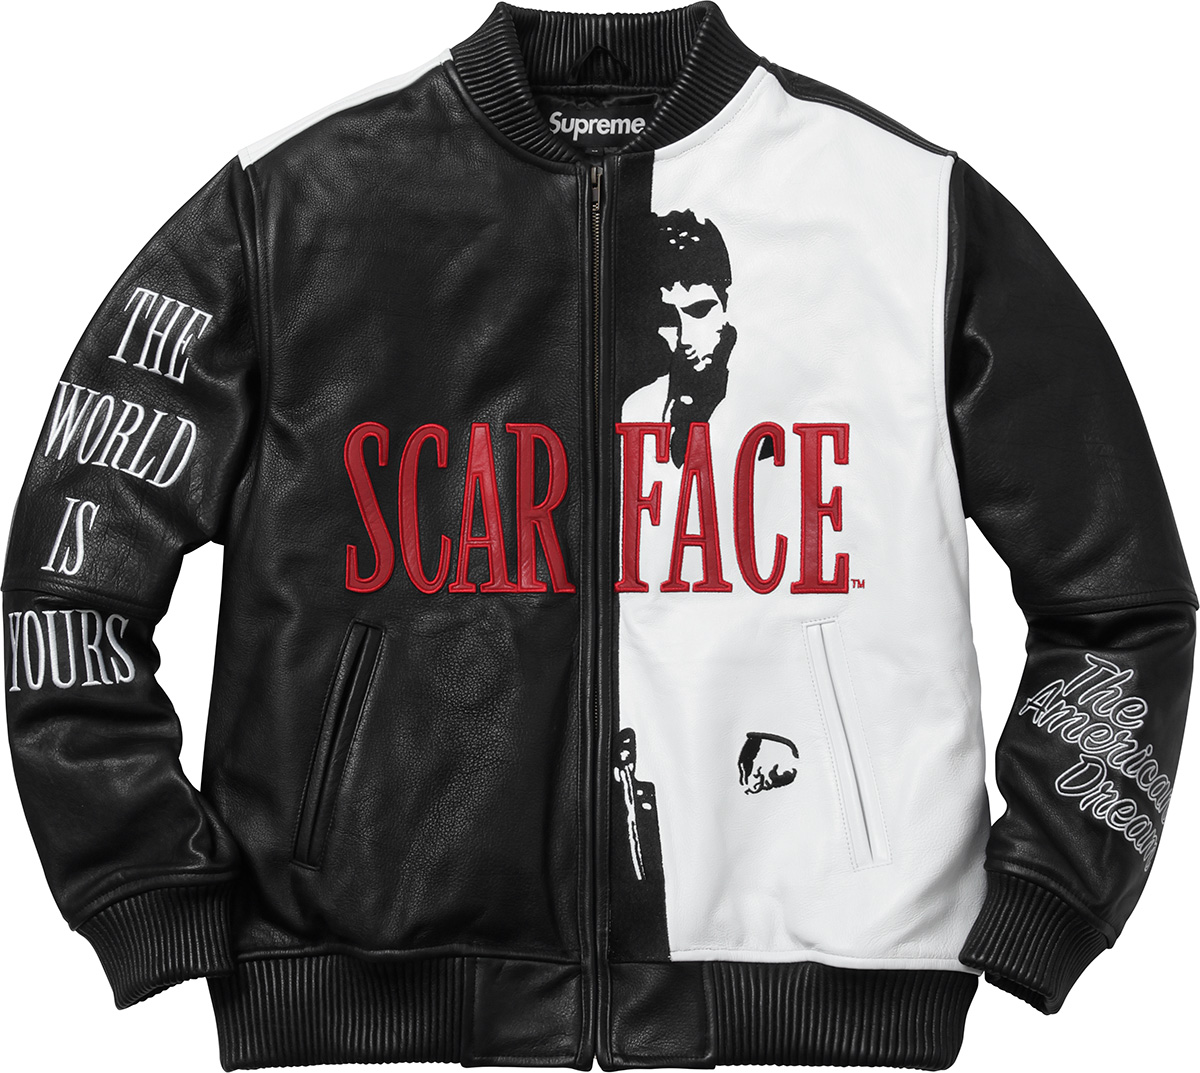 Supreme’s New Scarface Collection Is An Excellent Celebration Of ...